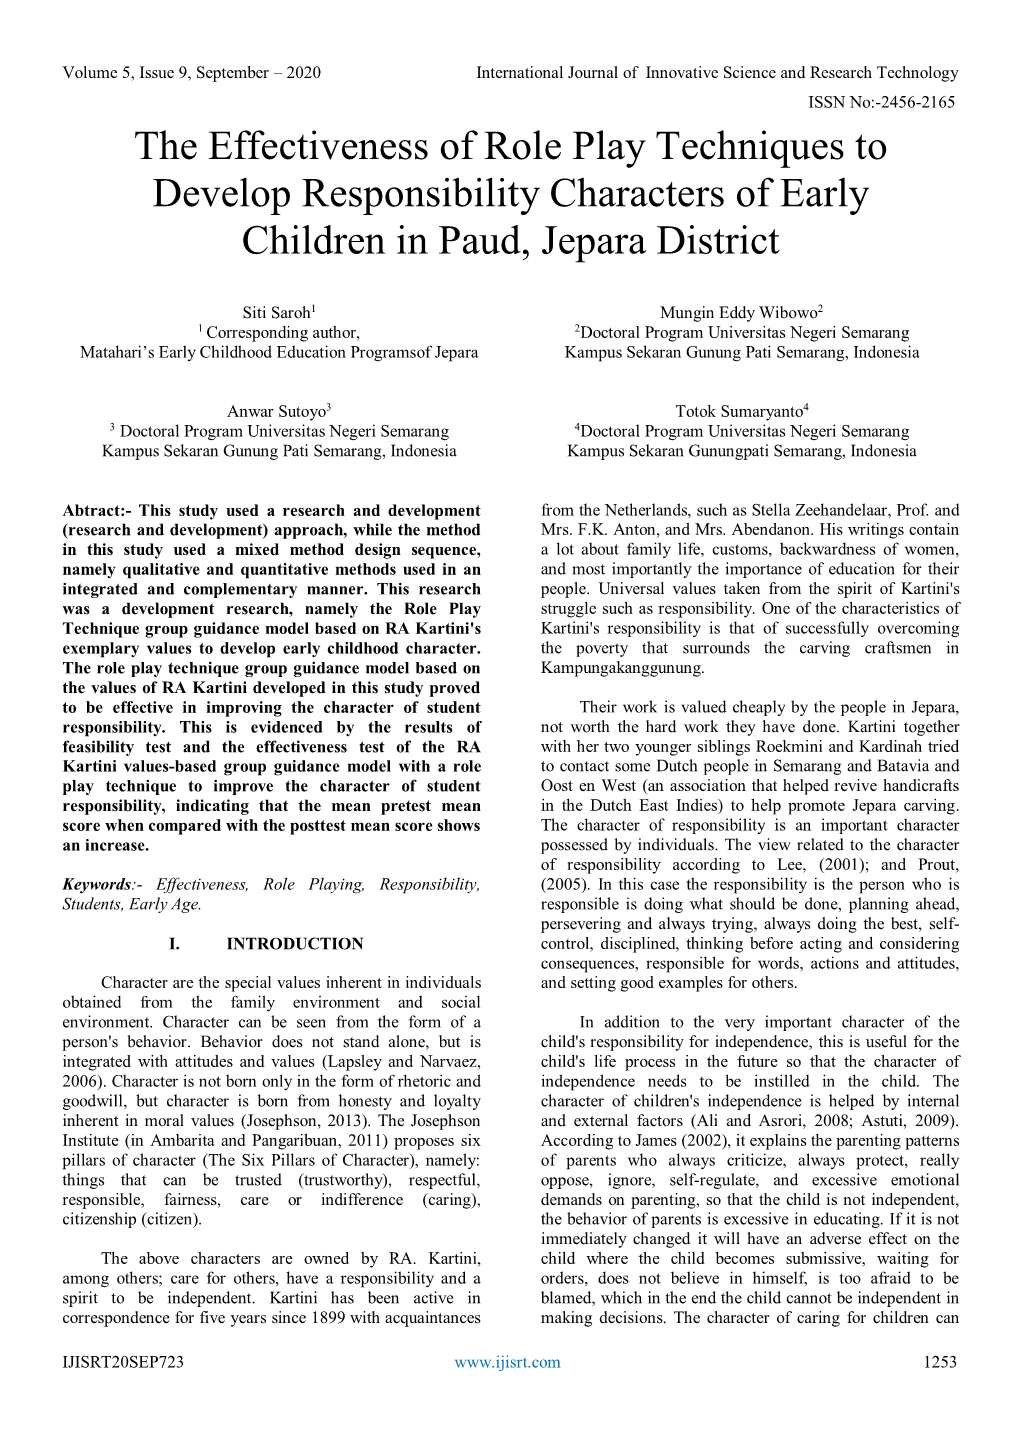 The Effectiveness of Role Play Techniques to Develop Responsibility Characters of Early Children in Paud, Jepara District